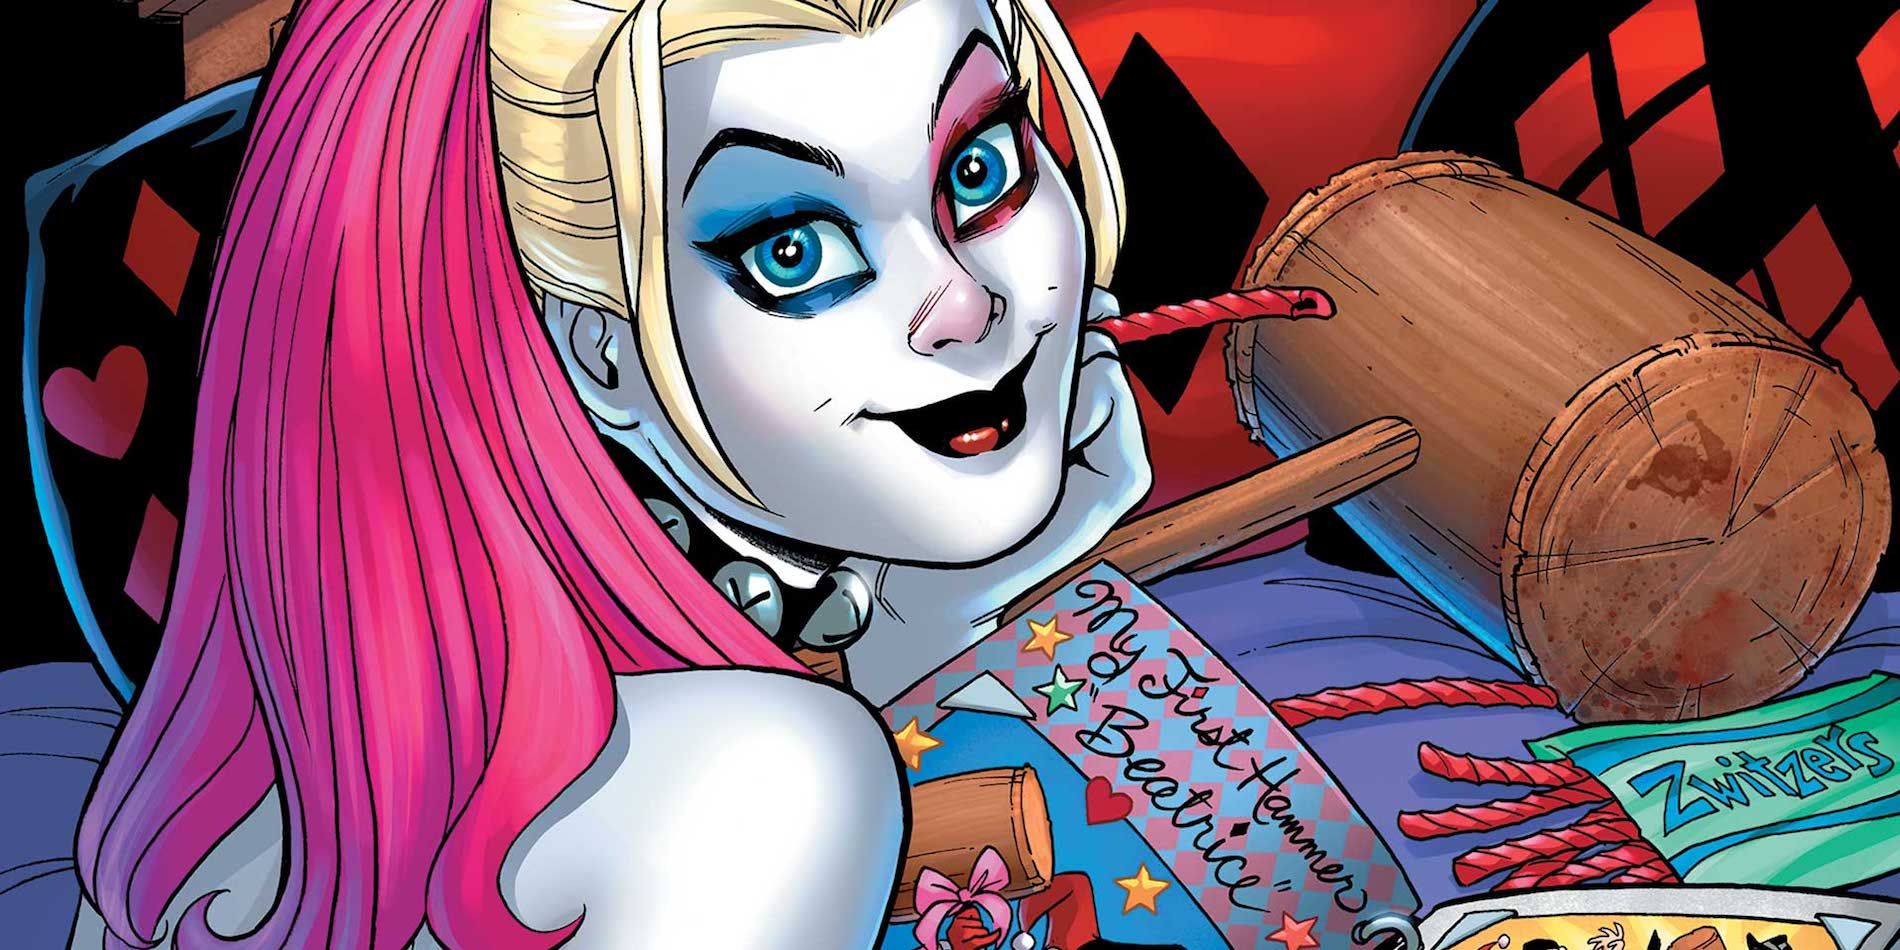 9 Unpopular Opinions About The Harley Quinn Comic Books, According To Reddit